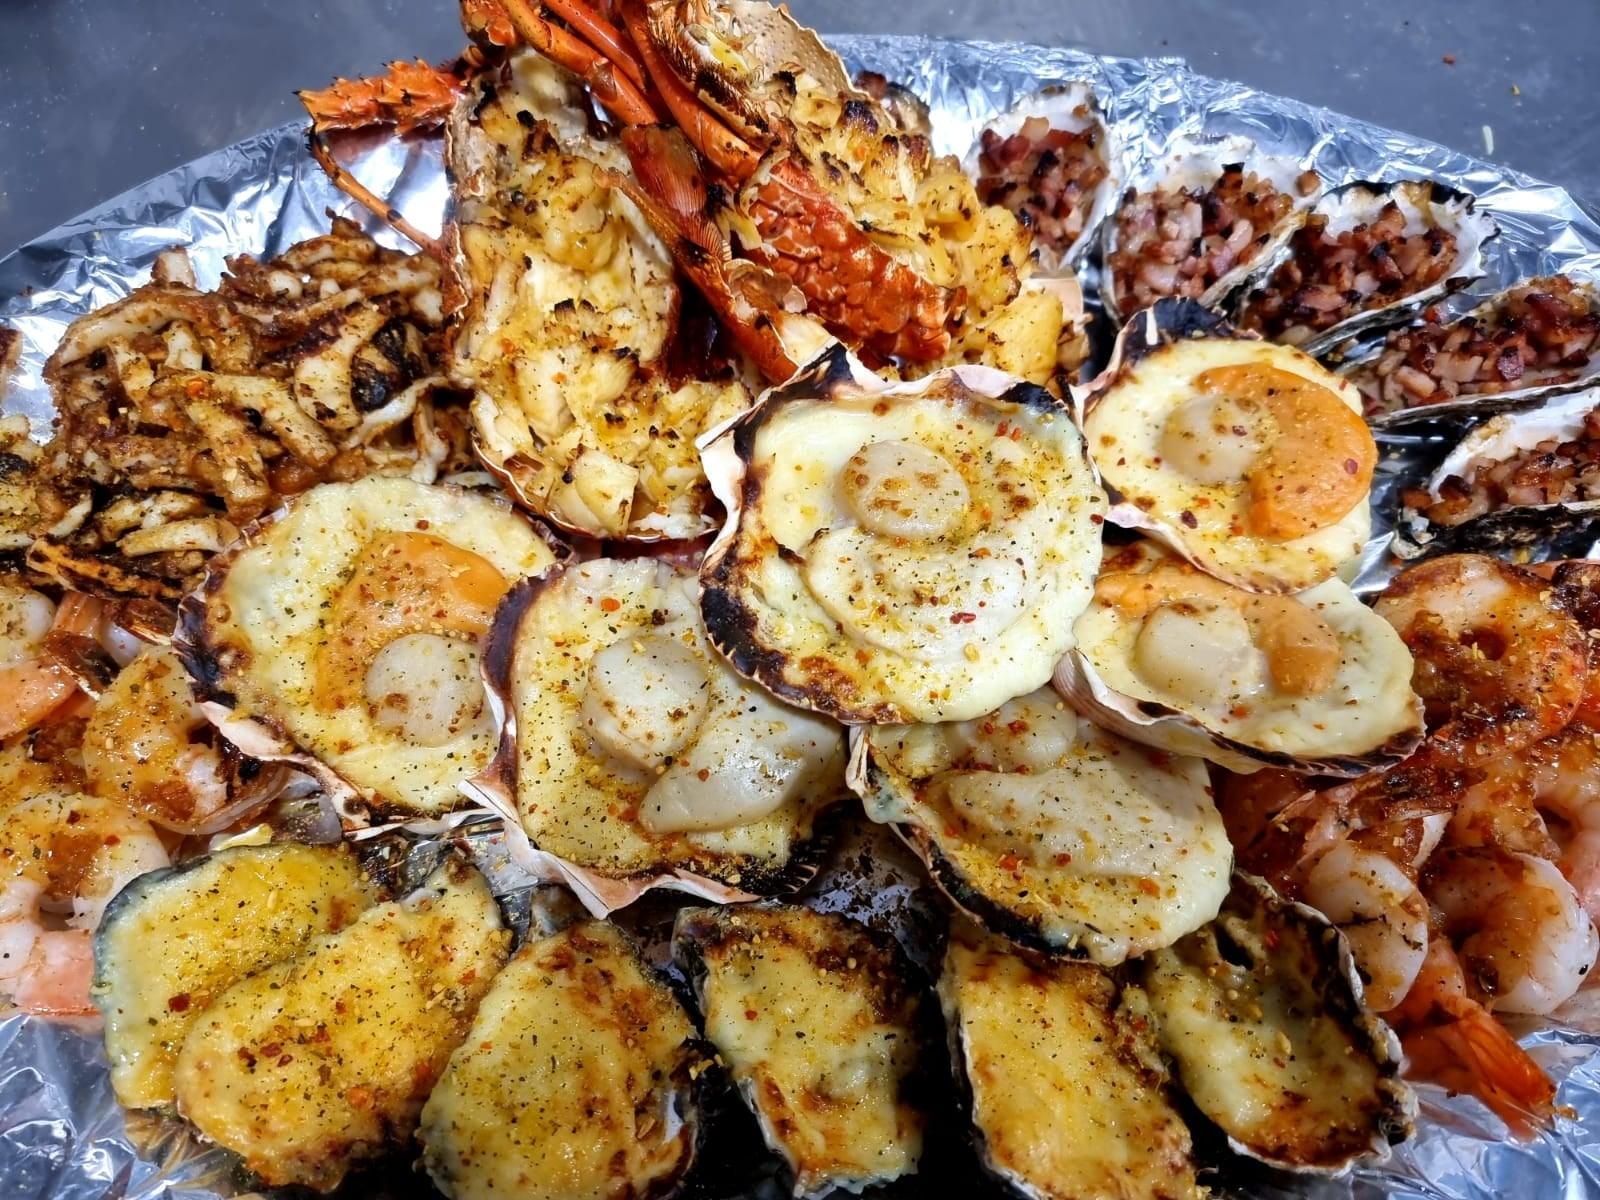 Cooked Seafood Platter